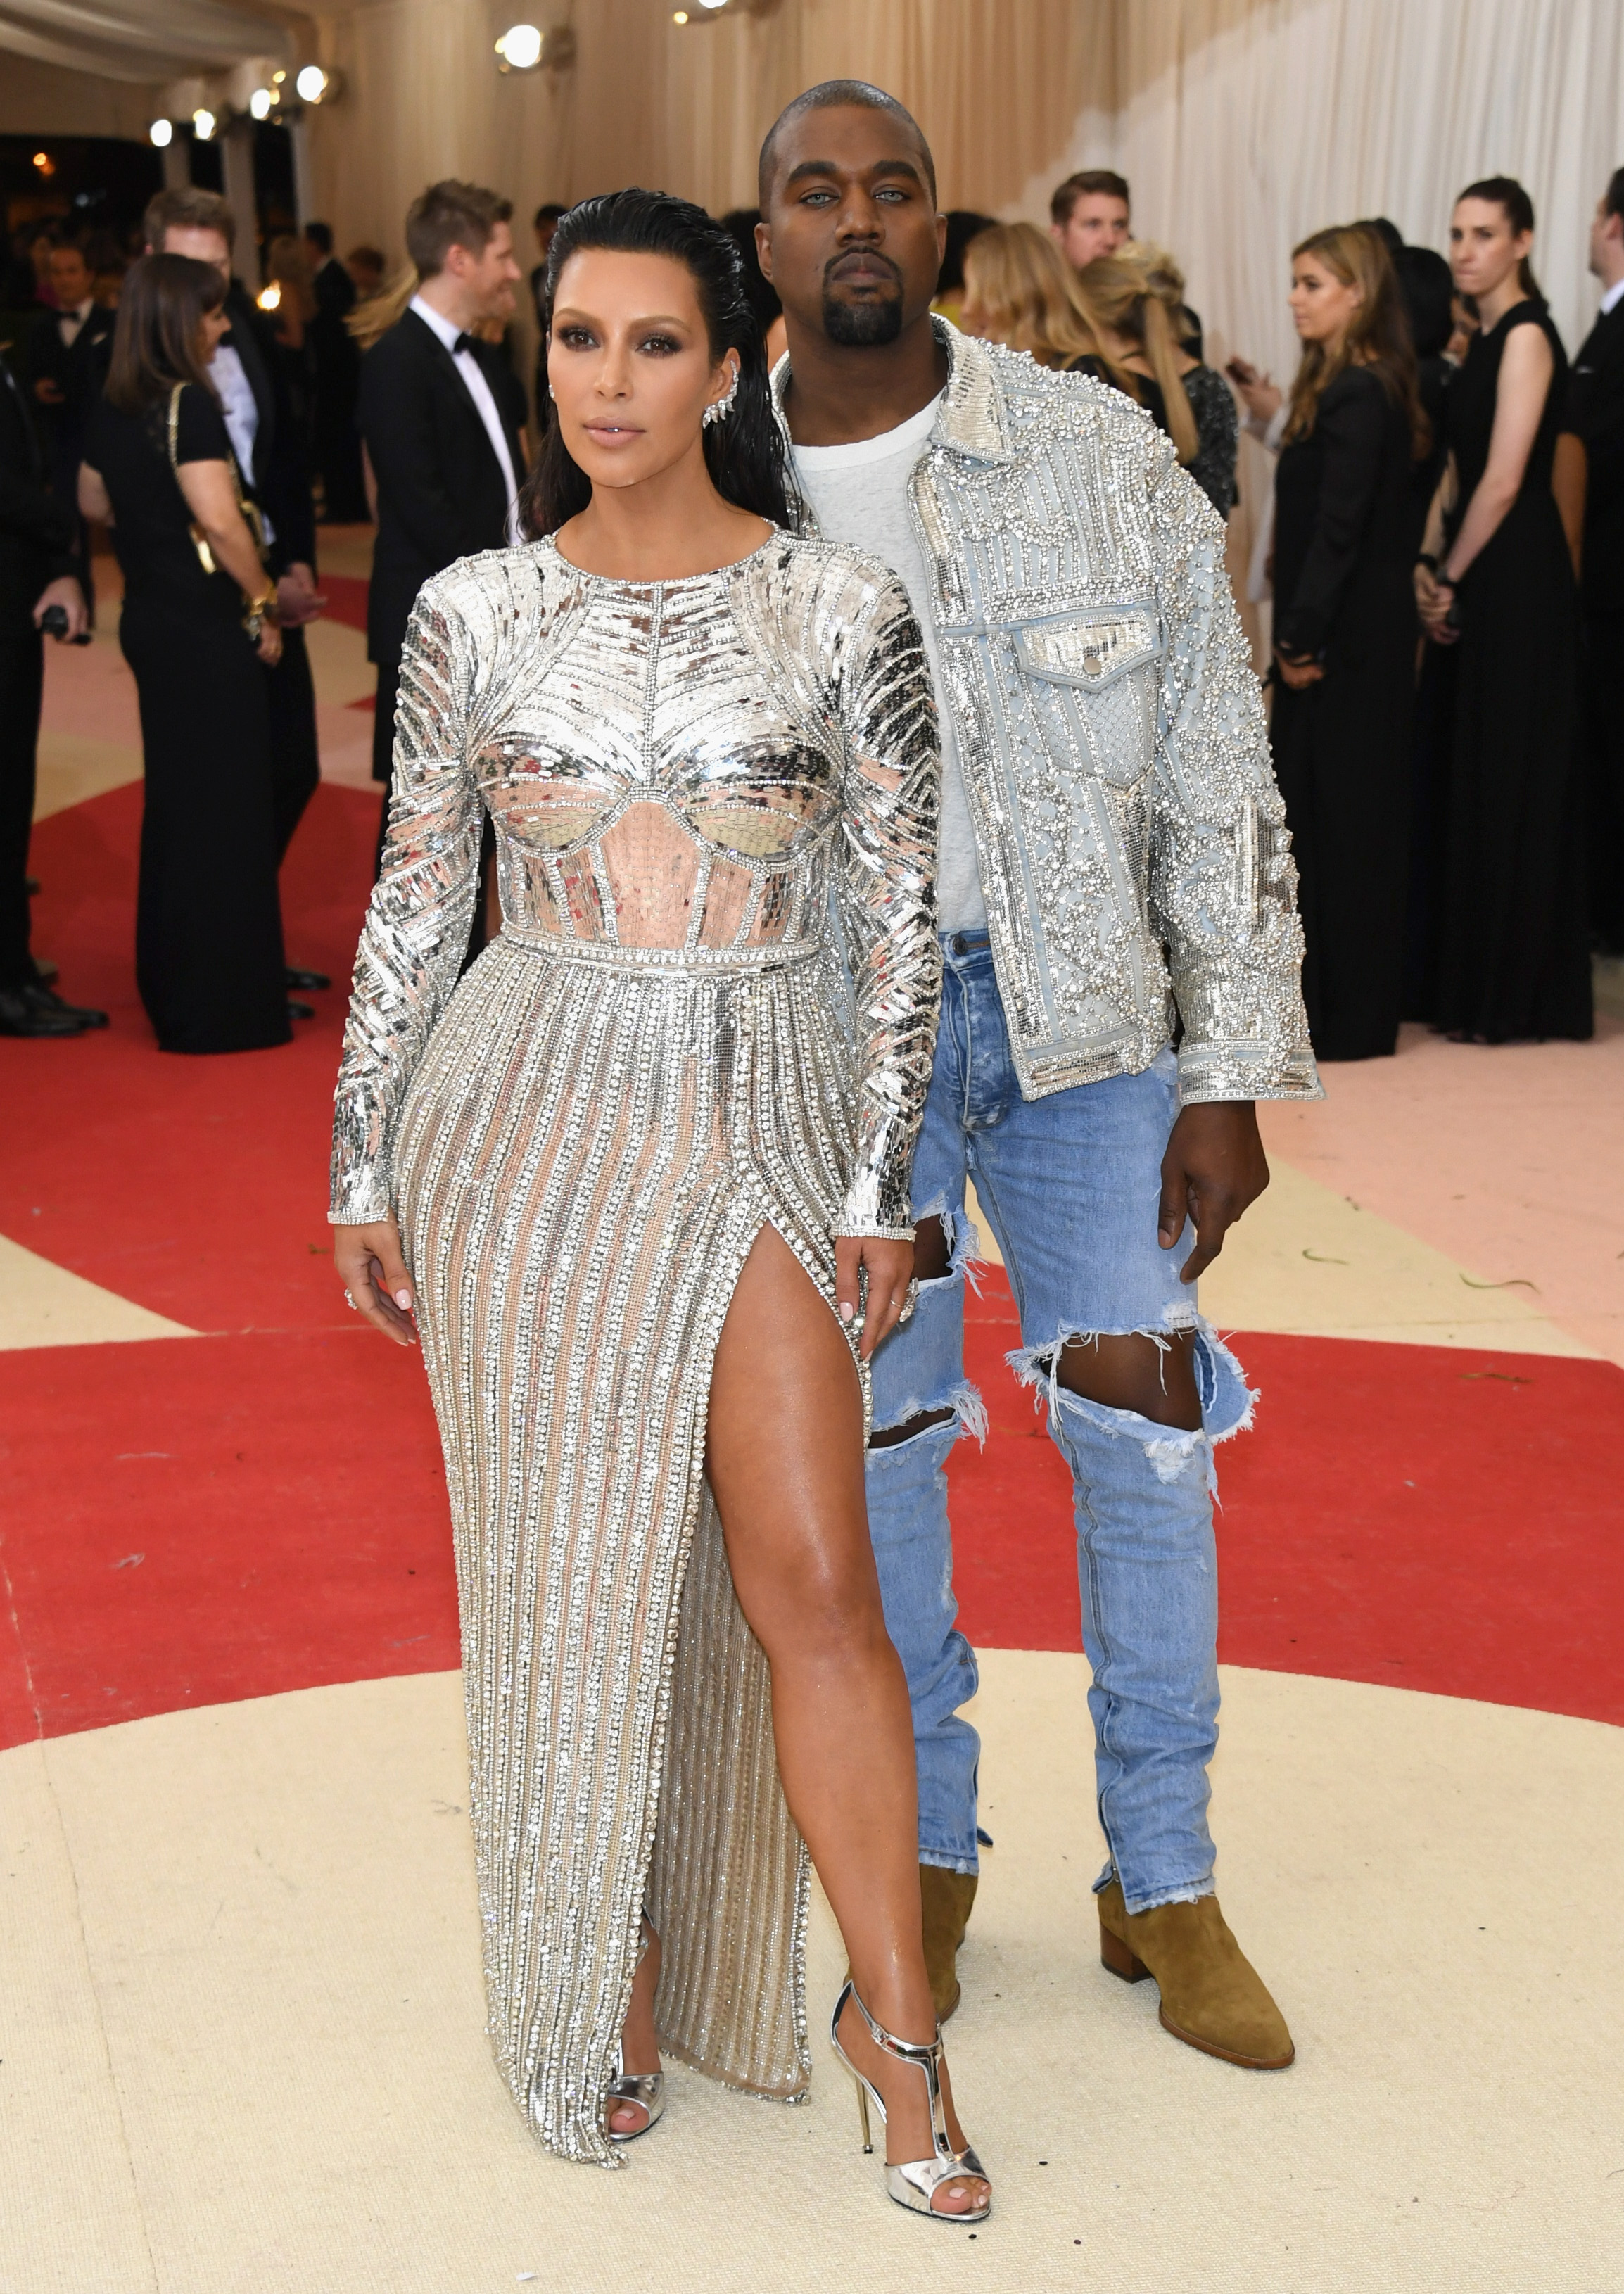 Kim Kardashian and Kanye West attend "Manus x Machina: Fashion In An Age Of Technology" Costume Institute Gala at Metropolitan Museum of Art on May 2, 2016 in New York City.